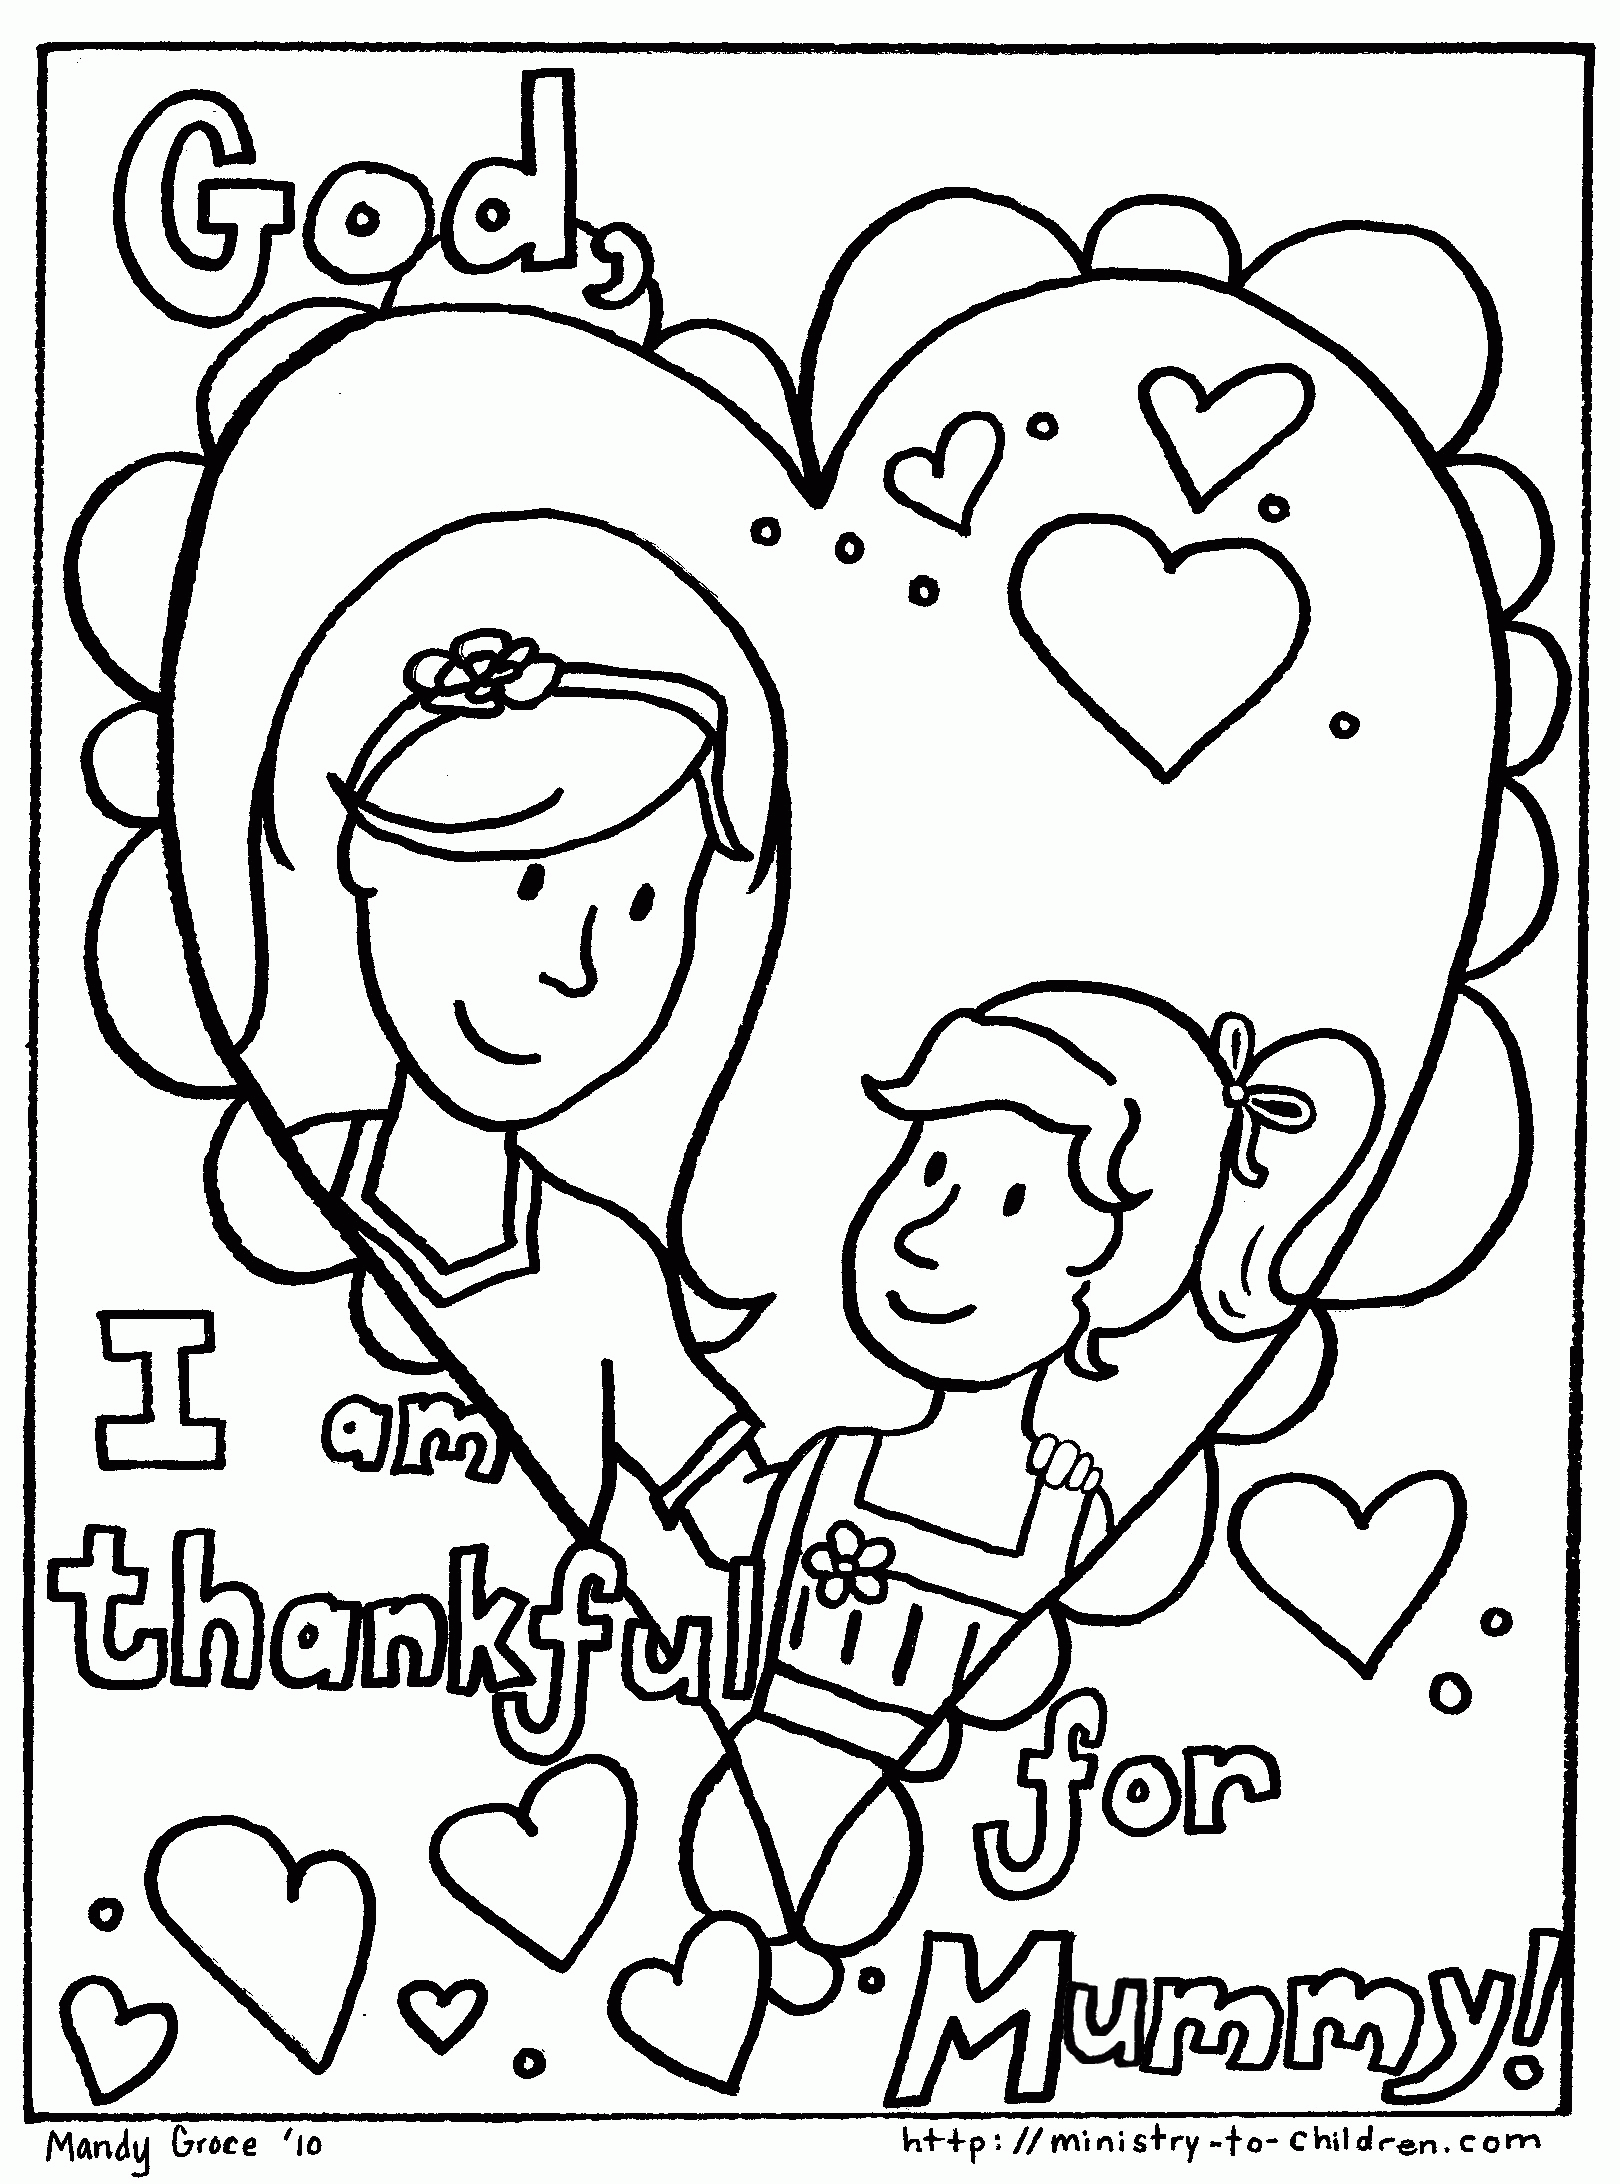 Happy Birthday Mom Printable Coloring Pages - Coloring Home